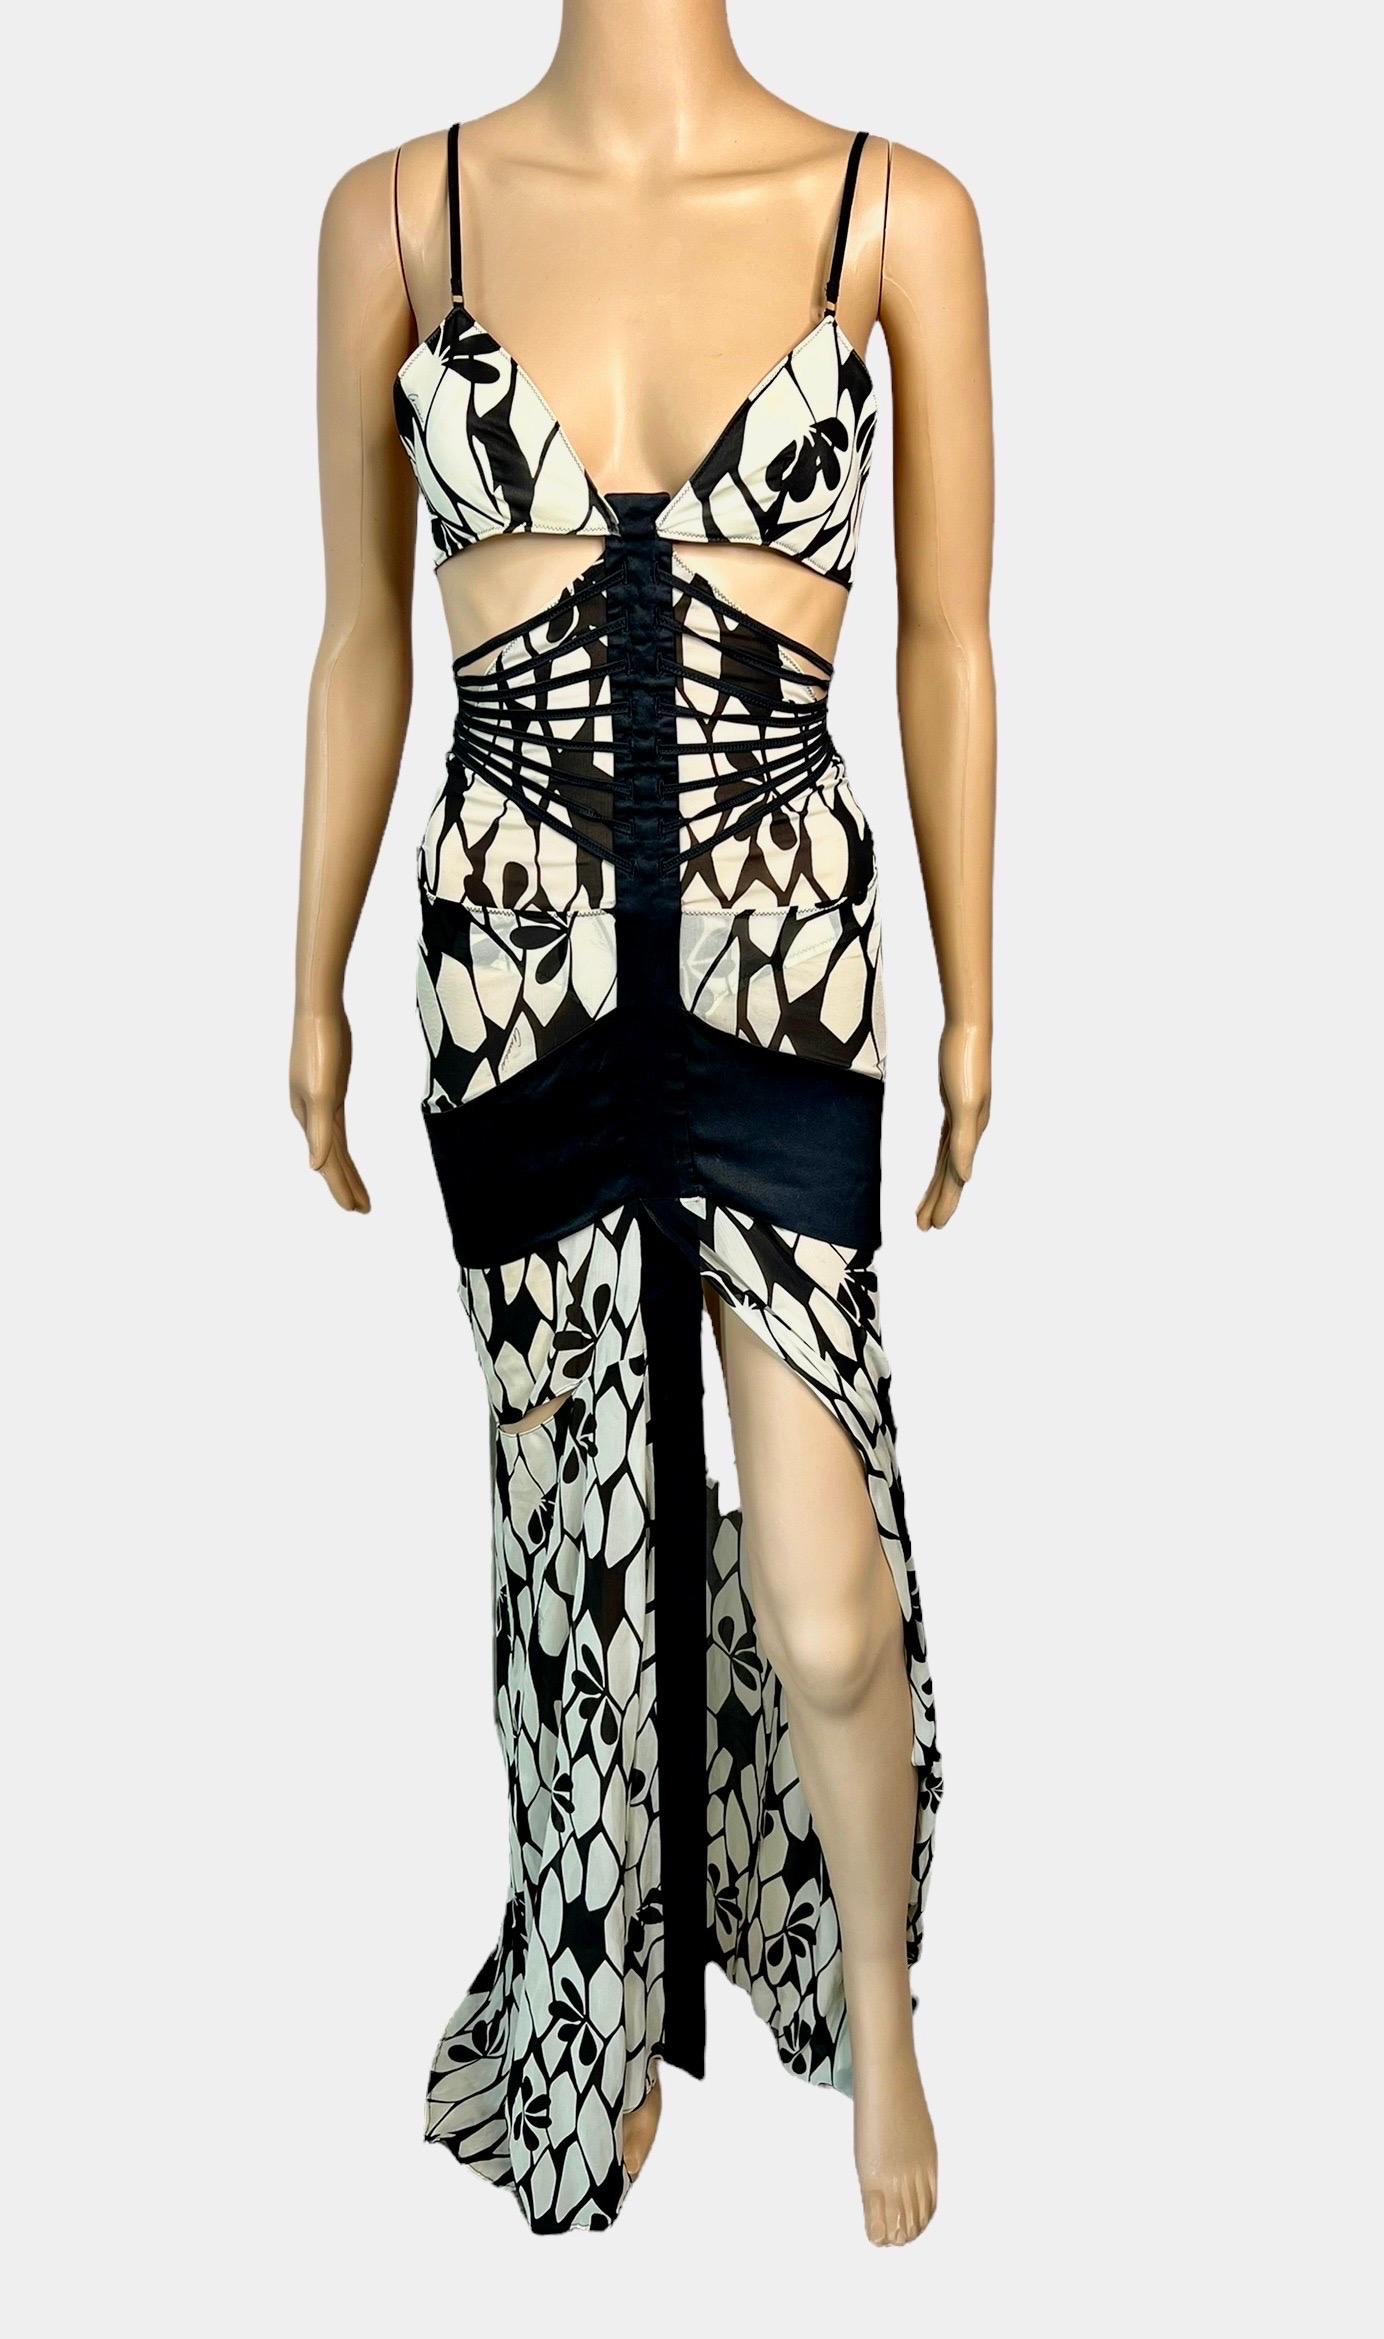 Tom Ford for Gucci c.2003 Plunging Bra Cutout Strappy Silk Evening Dress Gown For Sale 5